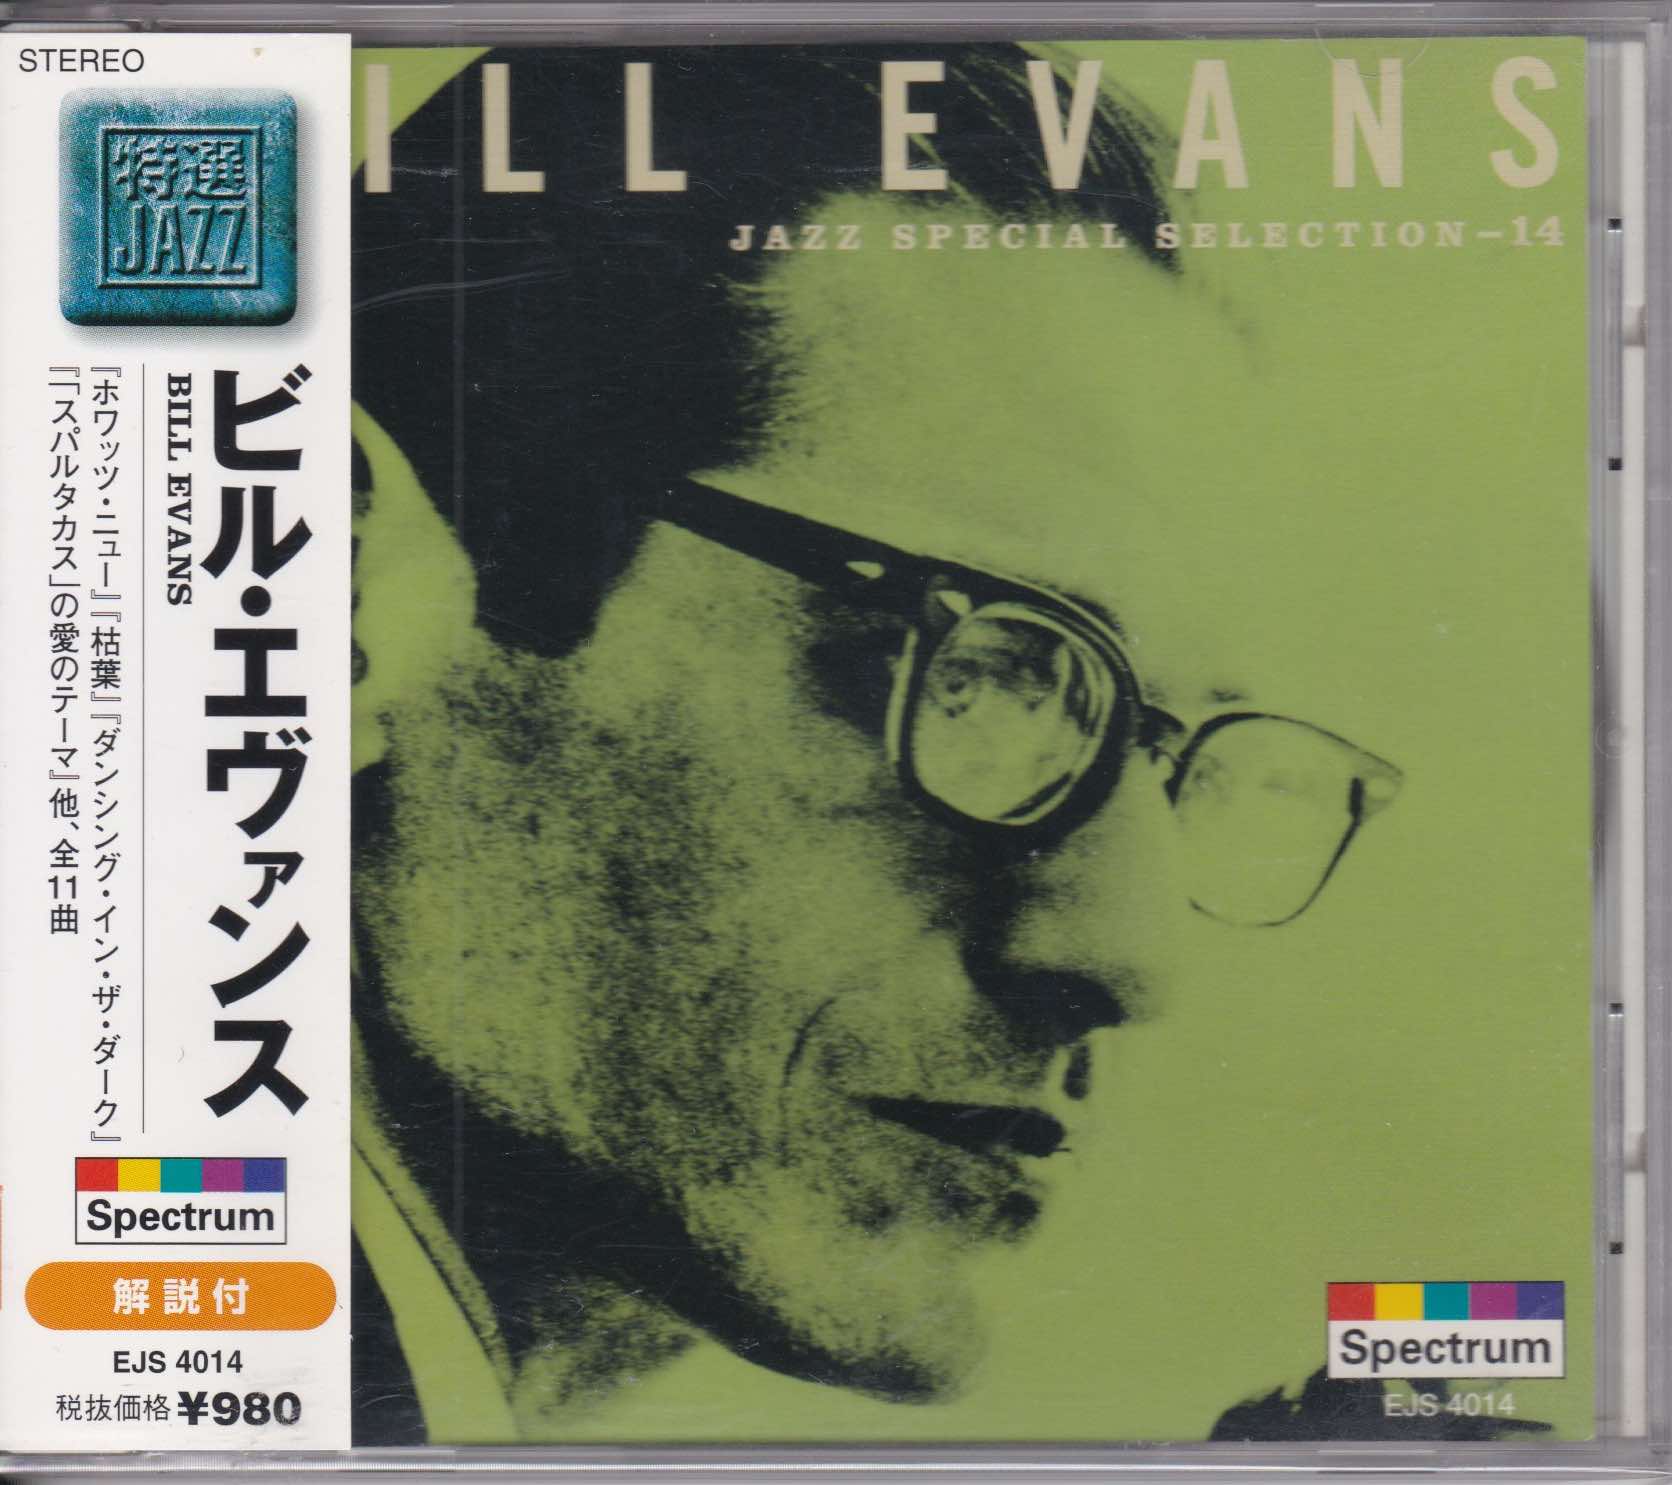 Bill Evans ‎– Jazz Special Selection - 14     (USED)